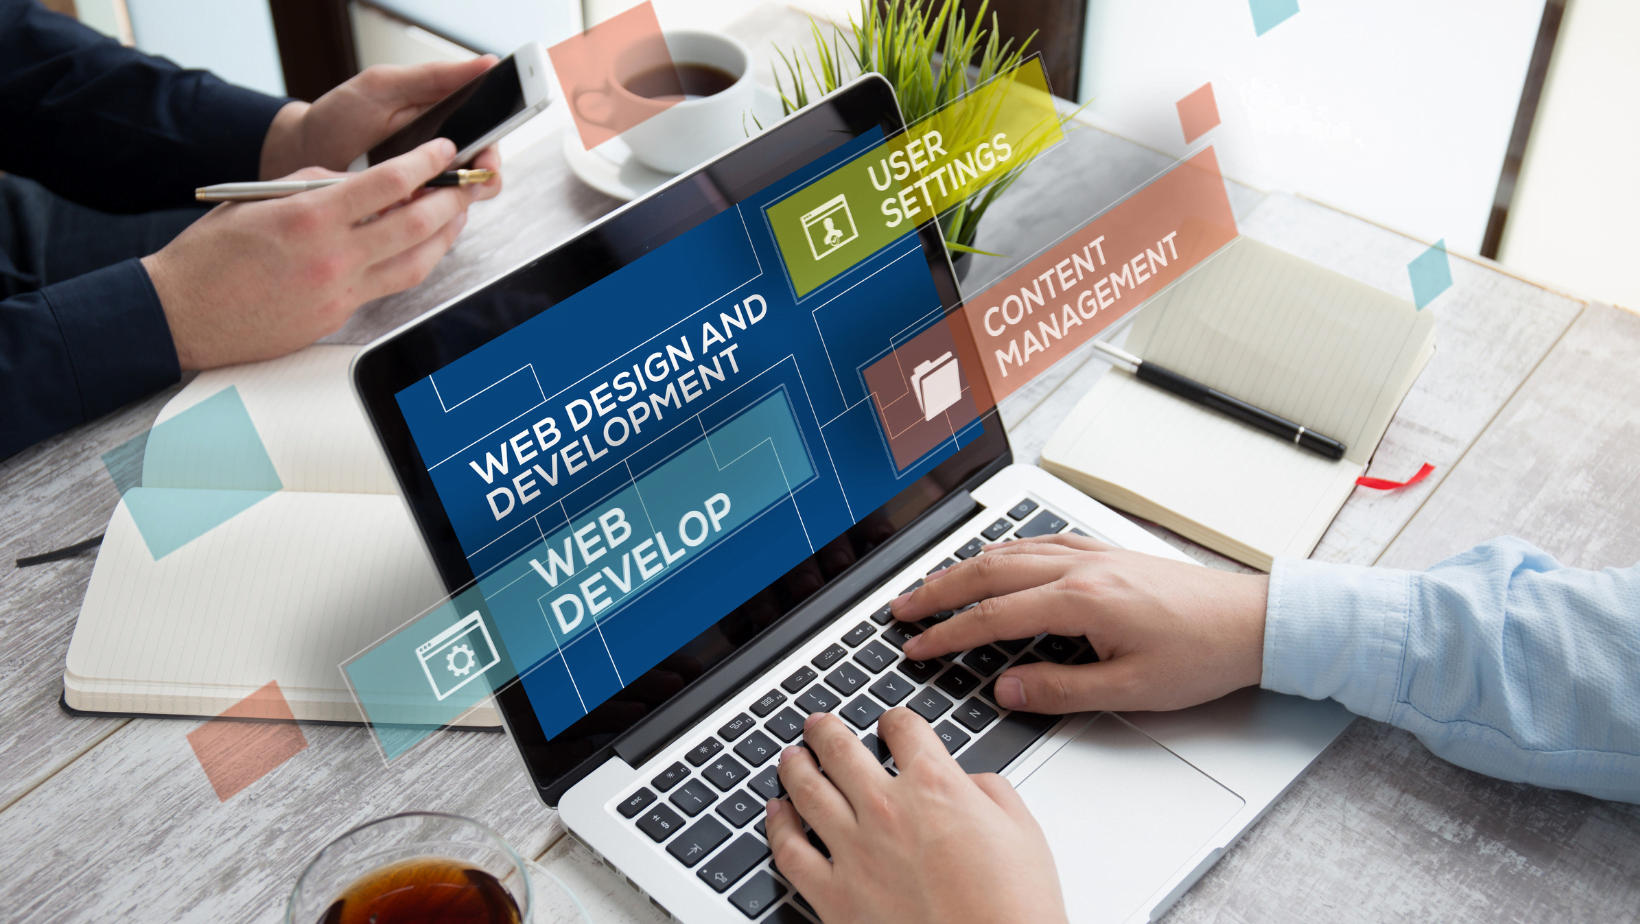 Full Guide to Web Application Development in 2022